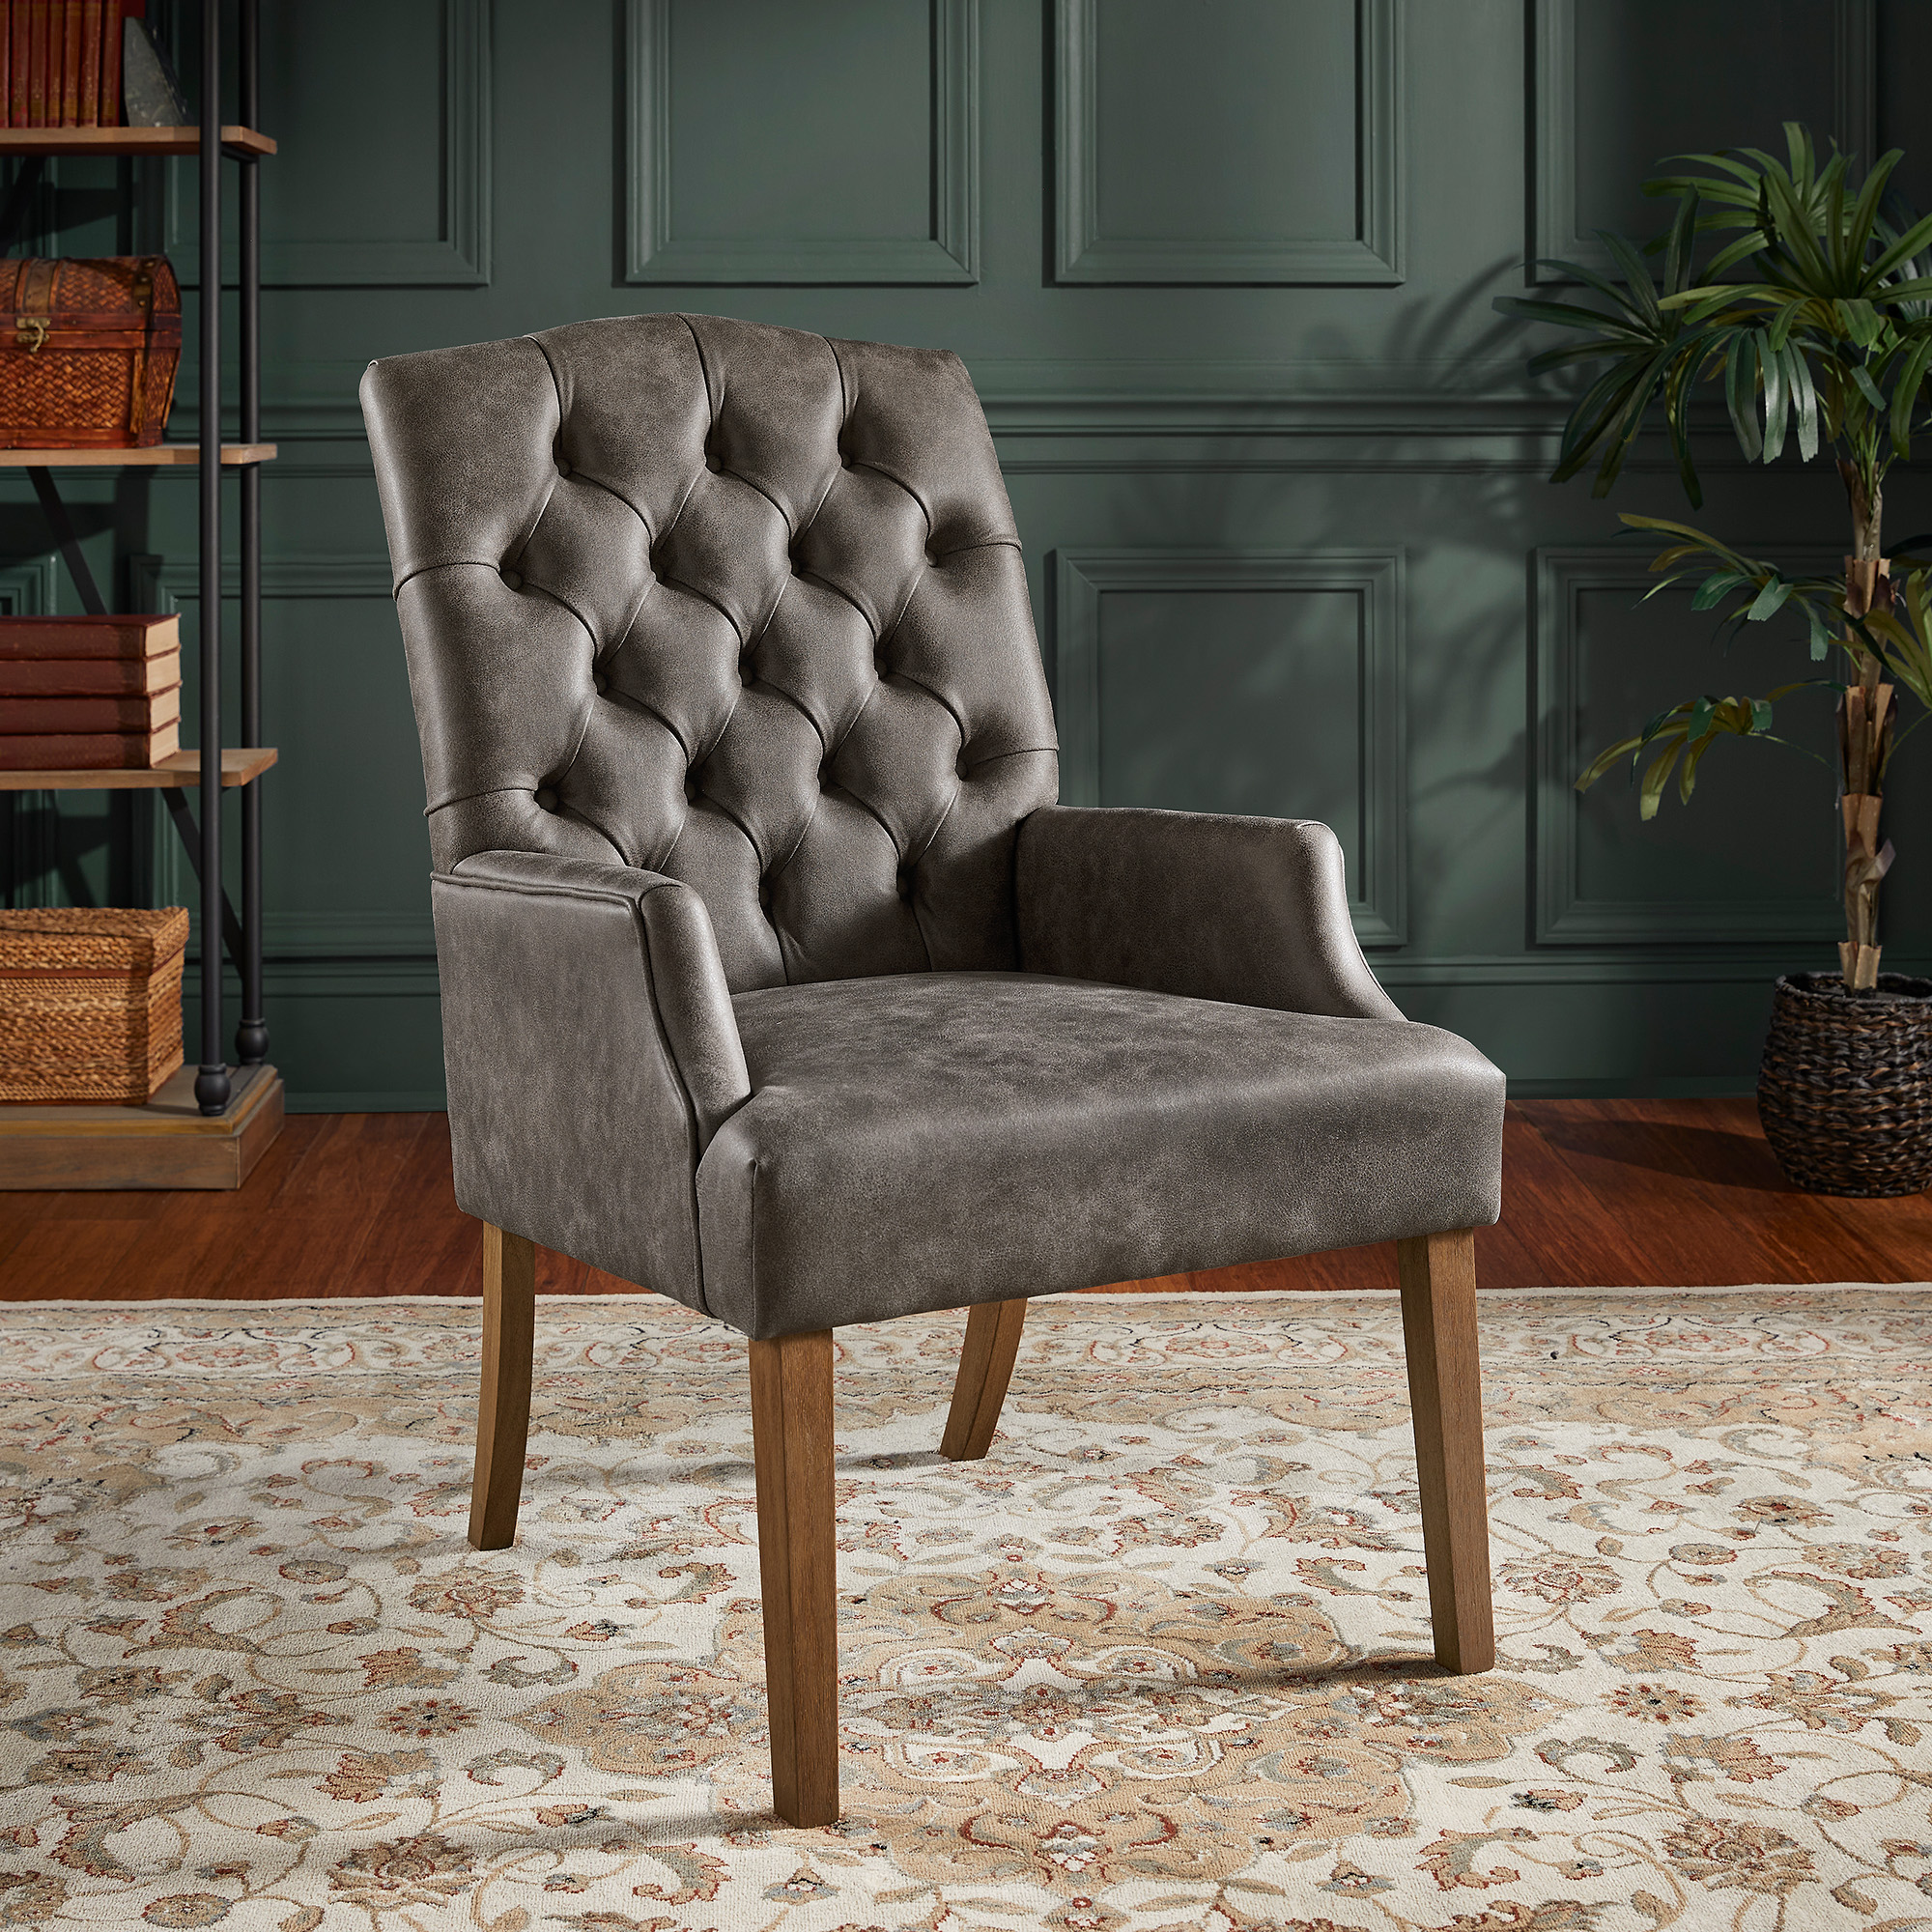 Light Distressed Natural Finish Polished Microfiber Tufted Dining Chair